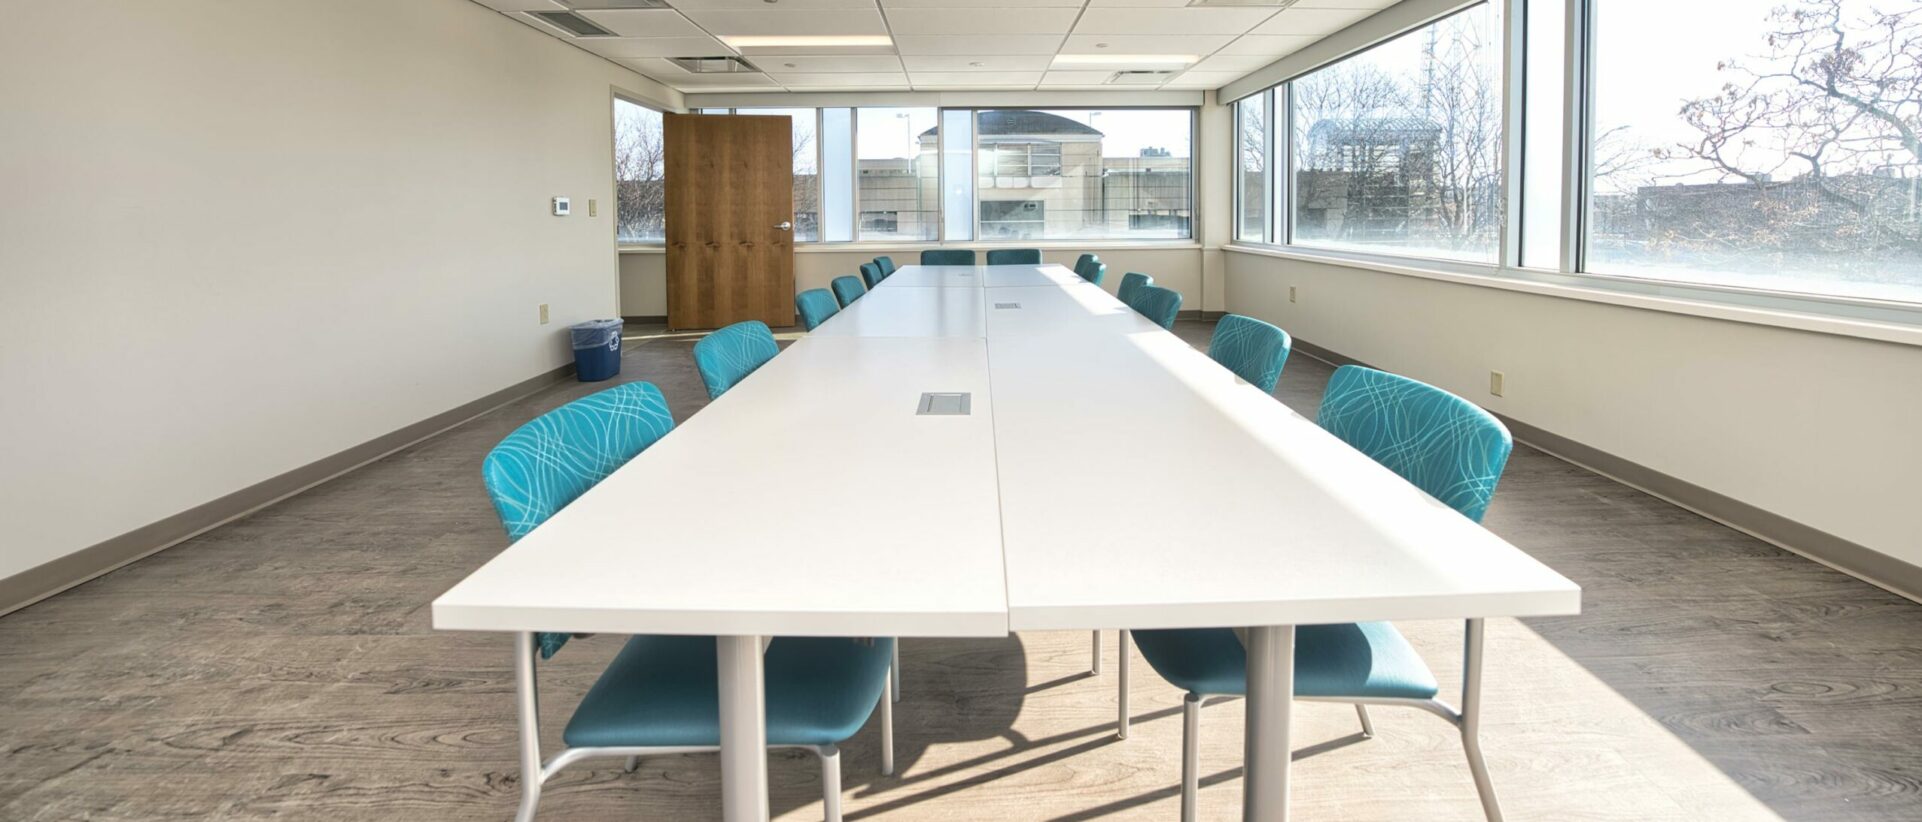 Interior shot of a meeting room in the Sandra Eskenazi Mental Health Center.